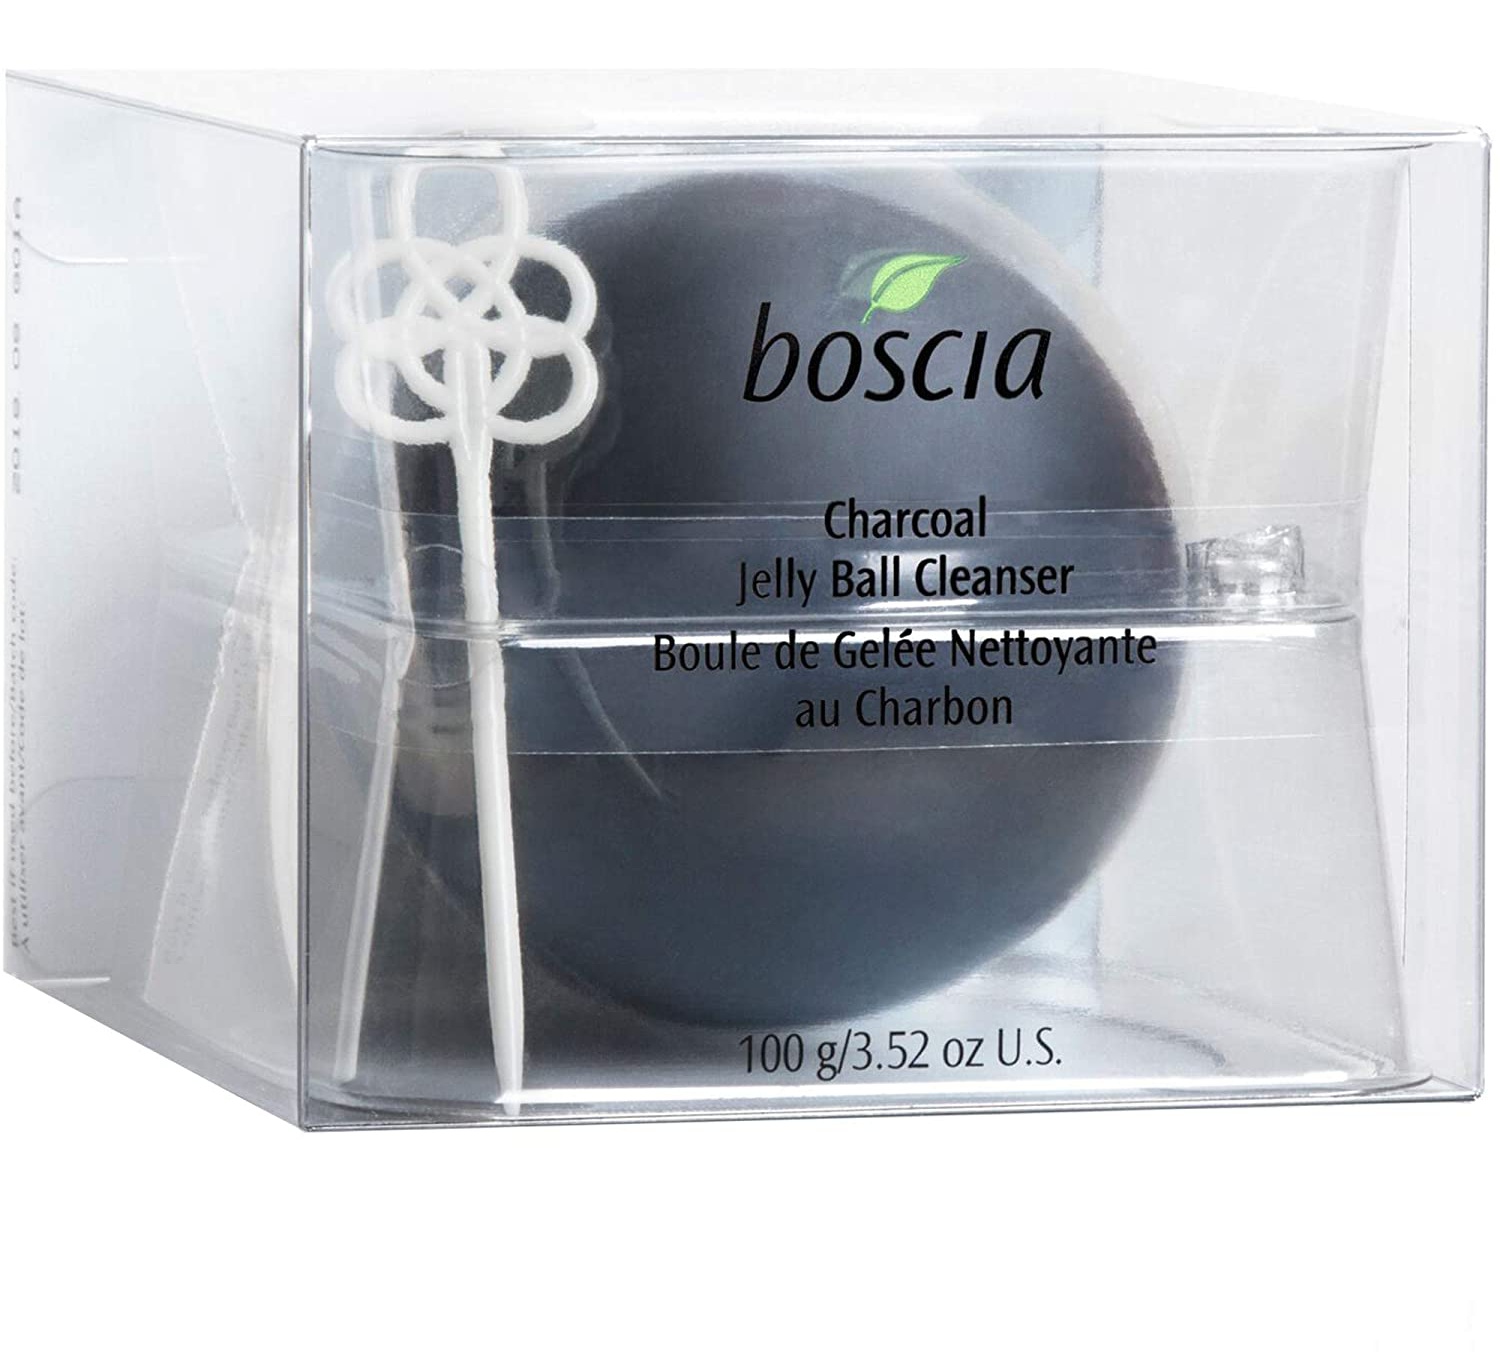 BOSCIA Charcoal Jelly Ball Cleanser